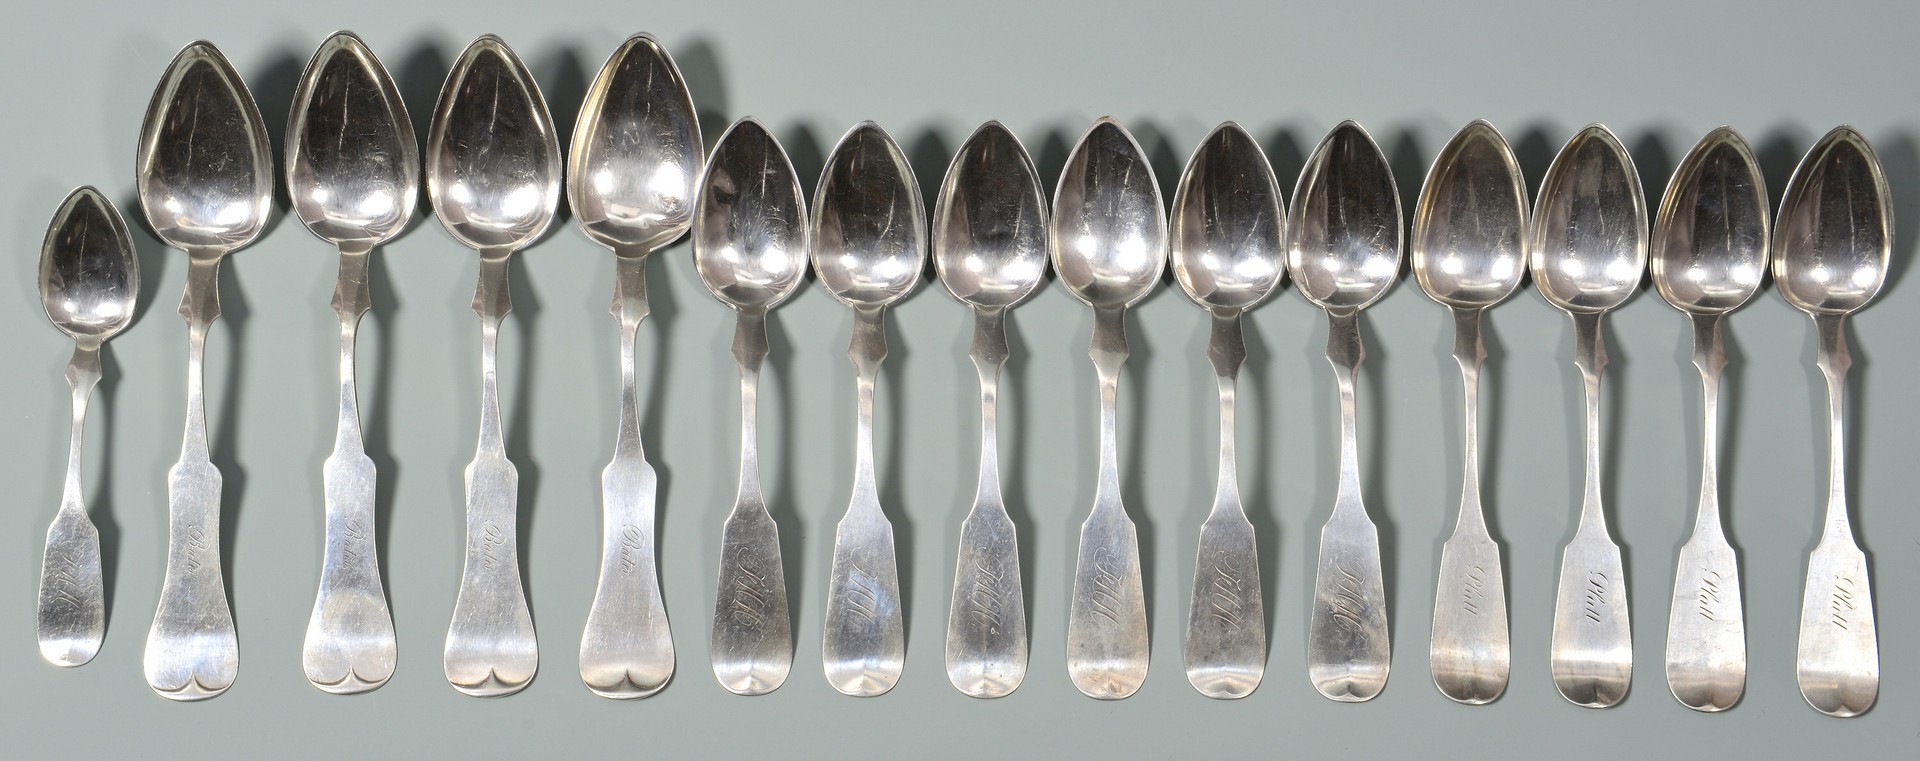 Lot 64: 15 Louisville, KY coin silver spoons